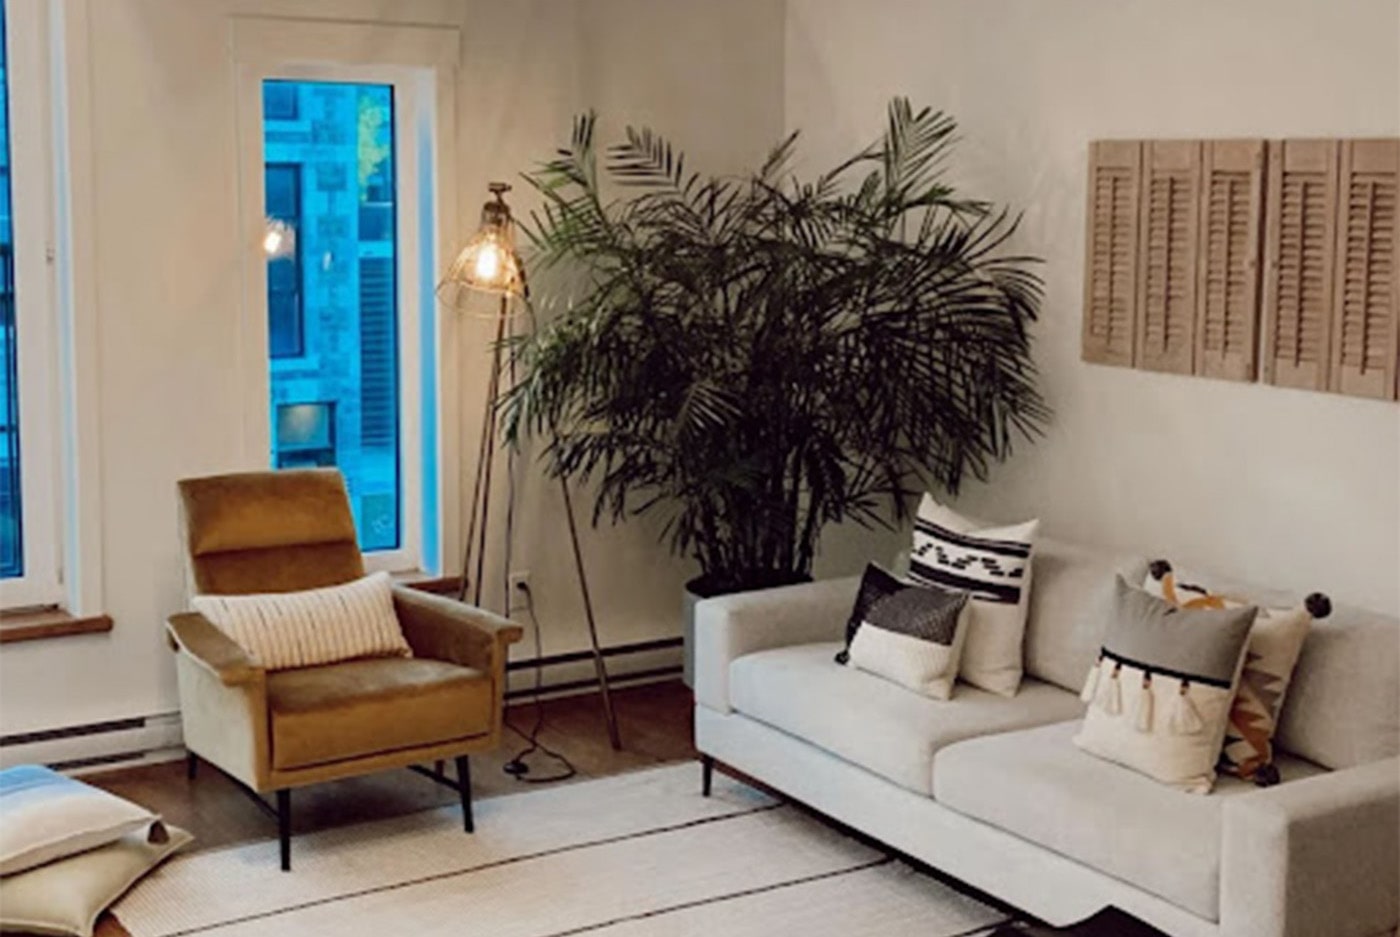 Tan and cream living room with minimalist patterns on the rug and pillows. There is a small chocolate brown velvet chair on the left wall and a cream rectangle long couch on the right wall. A large palm plant in the corner of the room with a tall floor lamp.